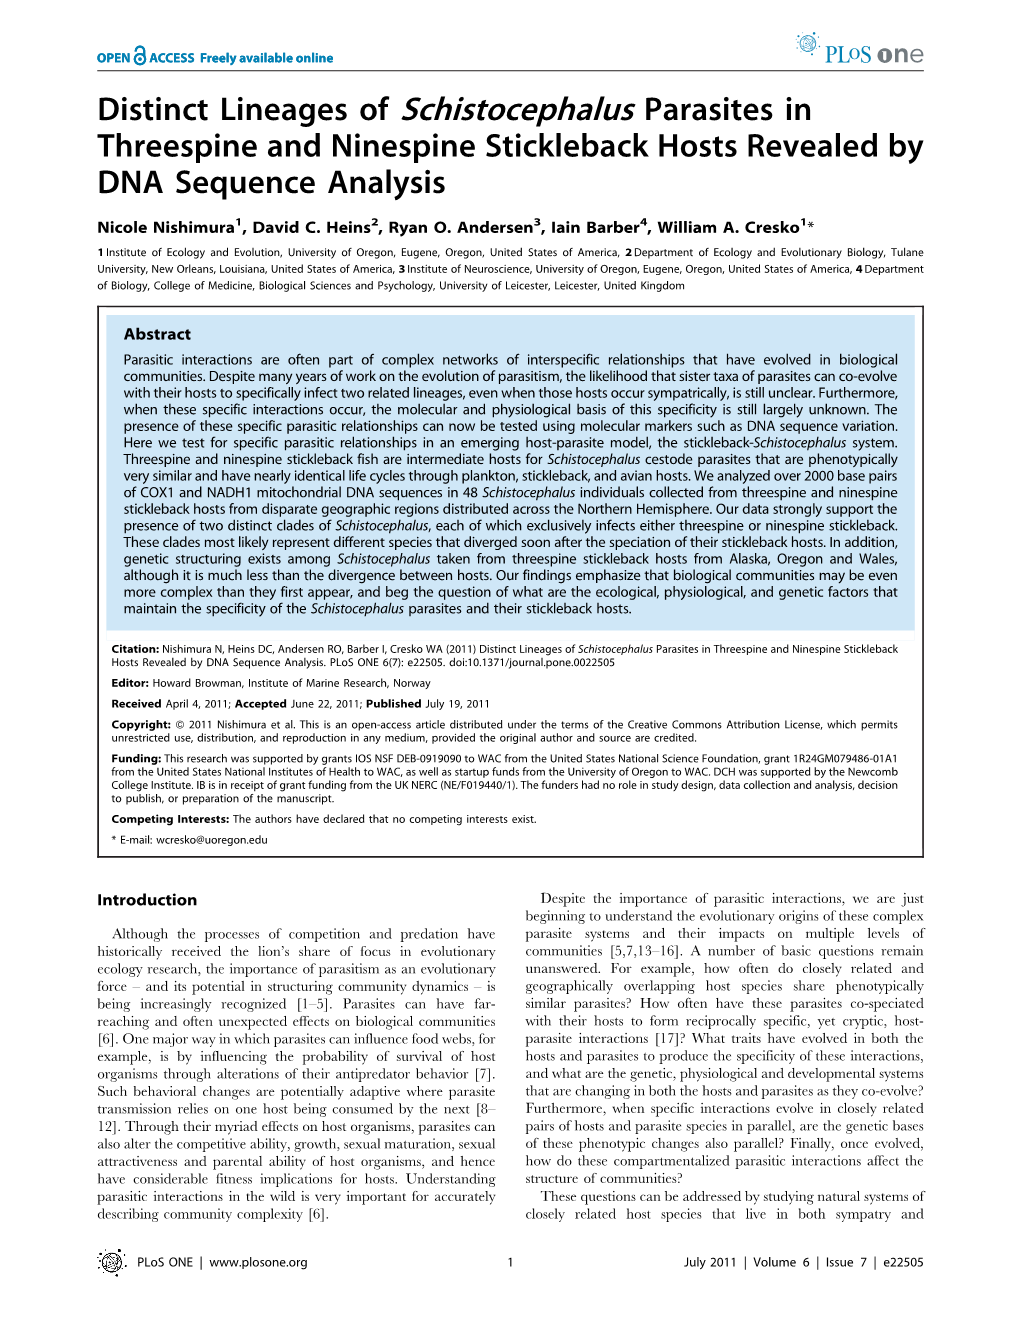 Distinct Lineages of Schistocephalus Parasites in Threespine and Ninespine Stickleback Hosts Revealed by DNA Sequence Analysis